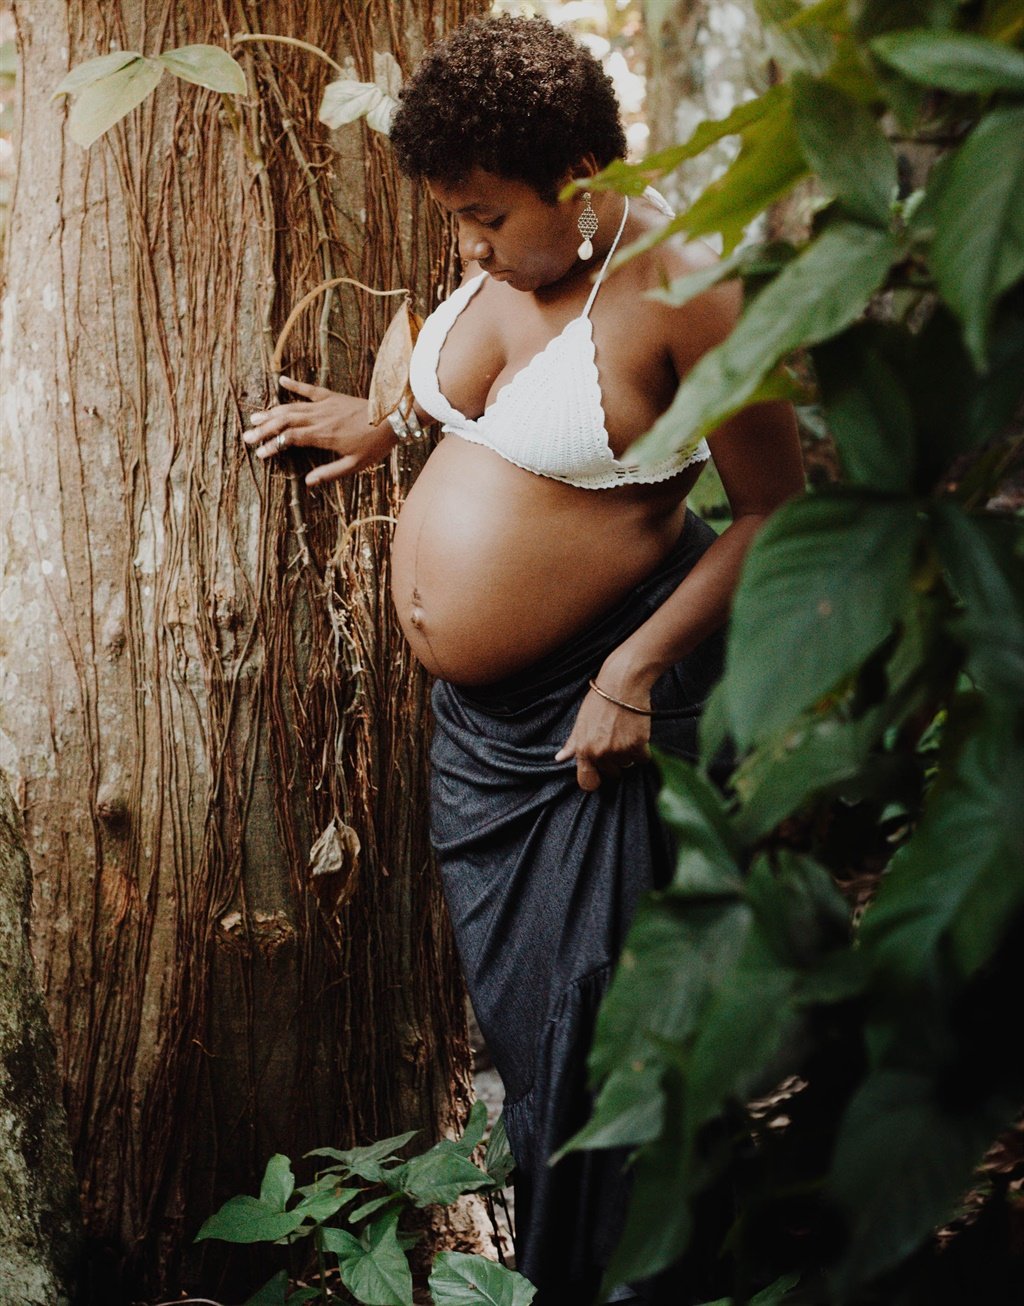 A woman celebrates her pregnancy with a shoot